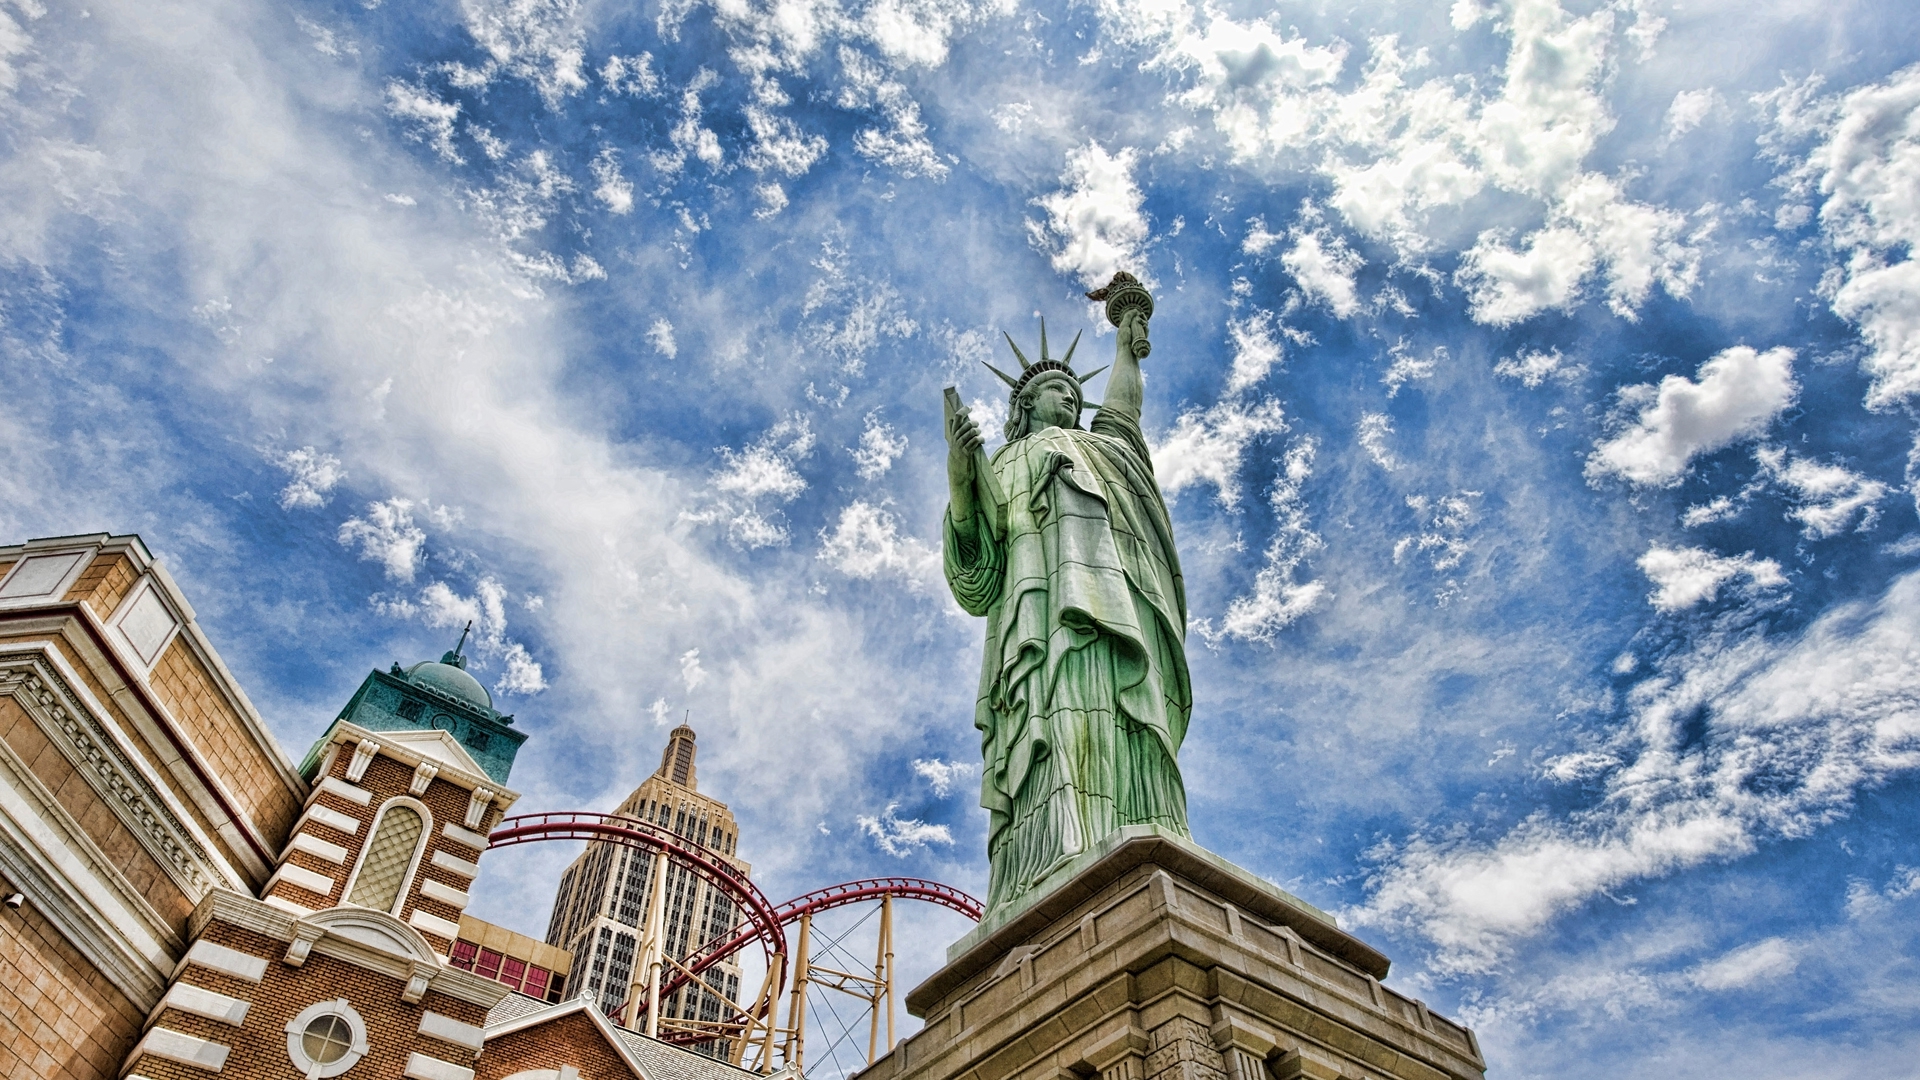 Statue Of Liberty New York United States Of America - Statue Of Liberty Hdr , HD Wallpaper & Backgrounds